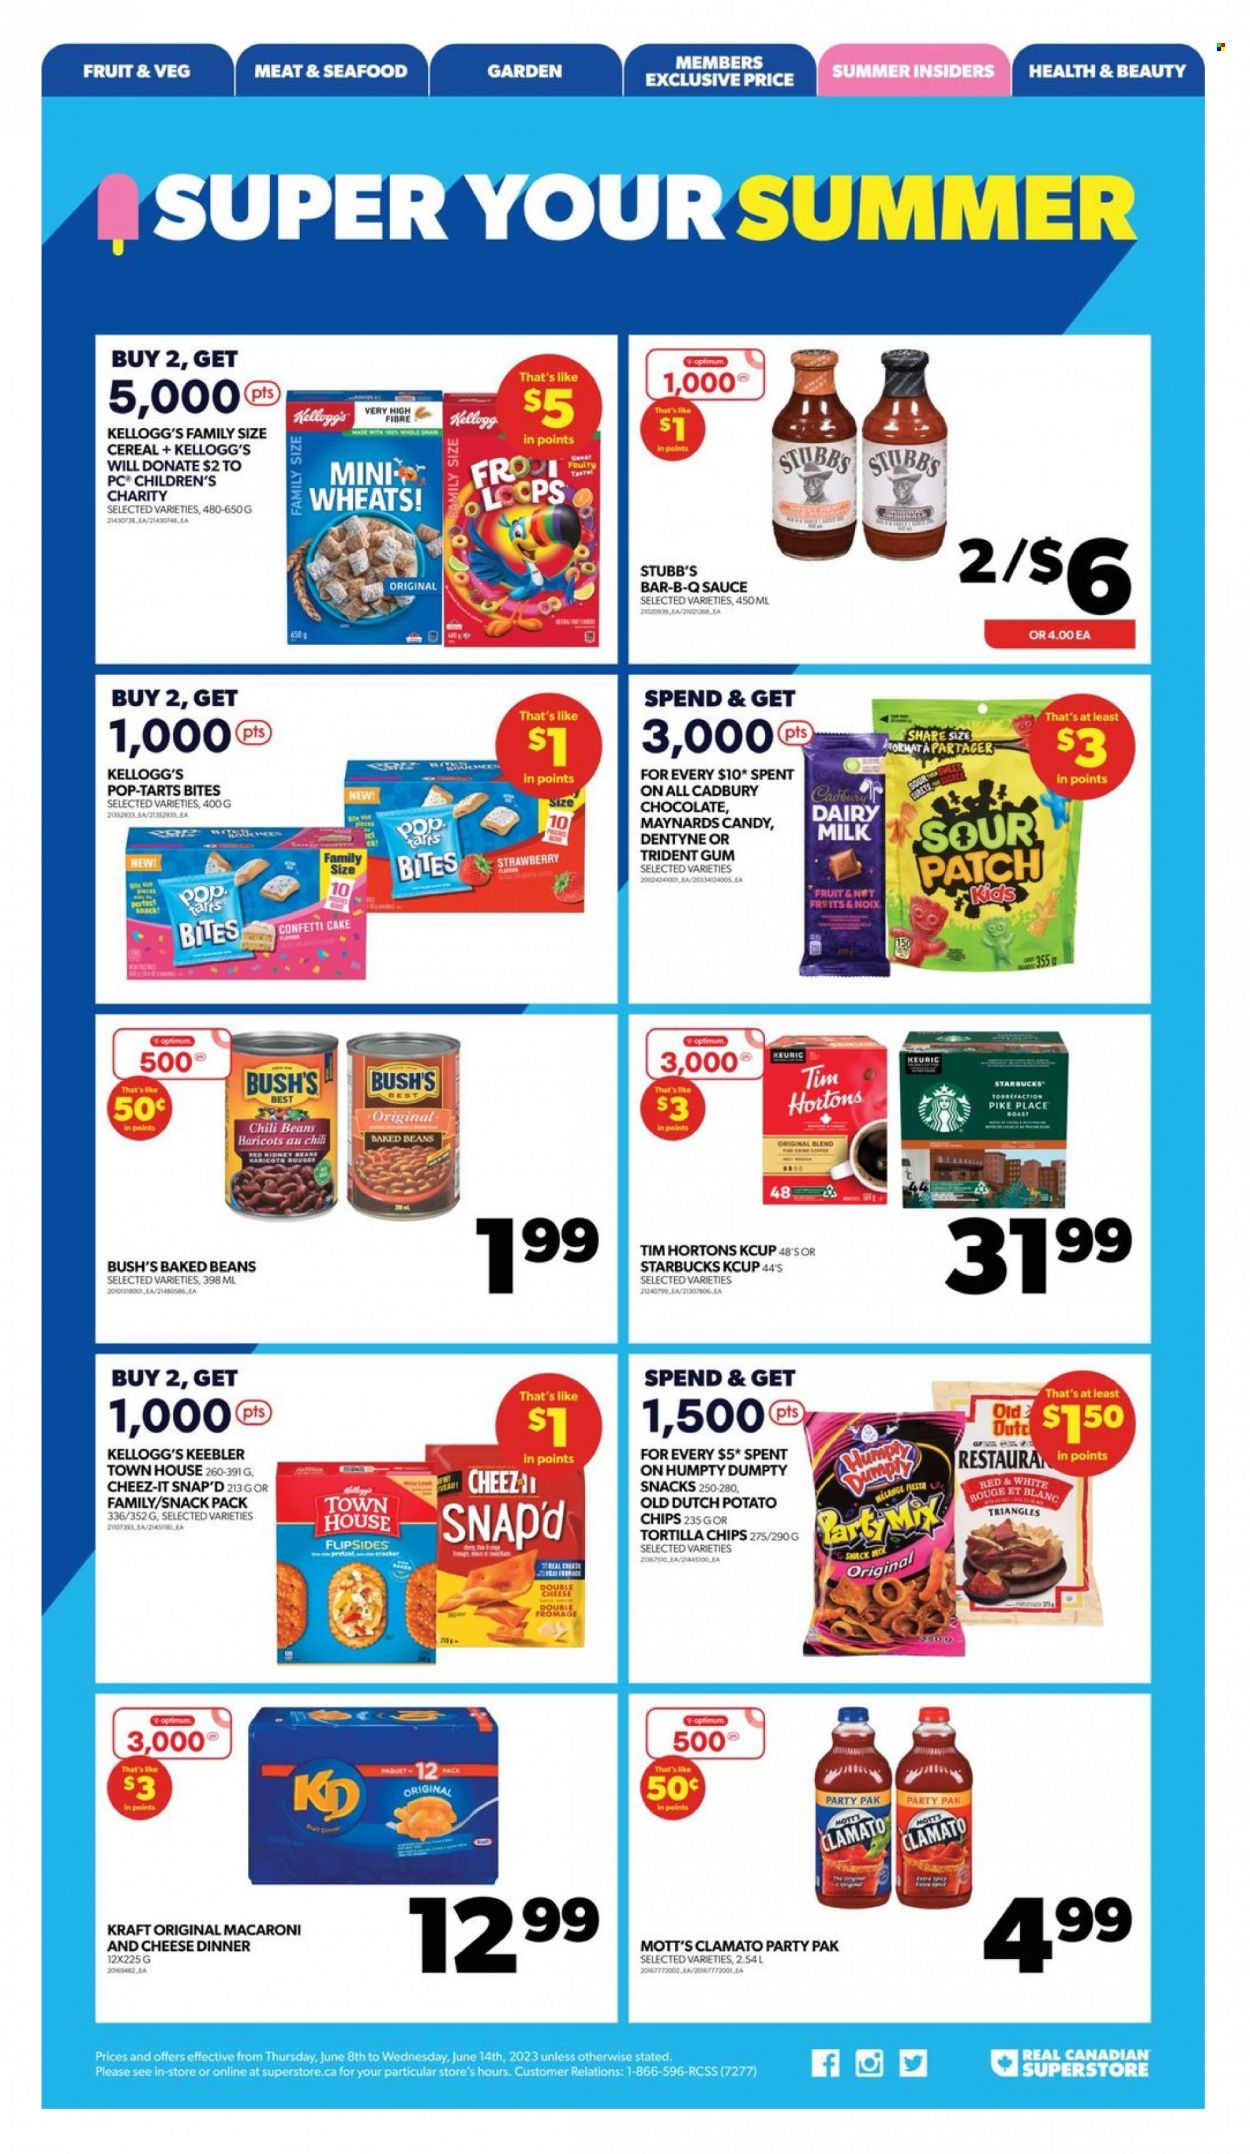 thumbnail - Real Canadian Superstore Flyer - June 08, 2023 - June 14, 2023 - Sales products - cake, Mott's, seafood, macaroni & cheese, sauce, Kraft®, chewing gum, Kellogg's, Cadbury, Dairy Milk, Trident, Pop-Tarts, Keebler, Sour Patch, Candy, tortilla chips, potato chips, chips, Cheez-It, salty snack, kidney beans, chili beans, baked beans, cereals, Clamato, coffee, Starbucks, Keurig, Optimum. Page 12.